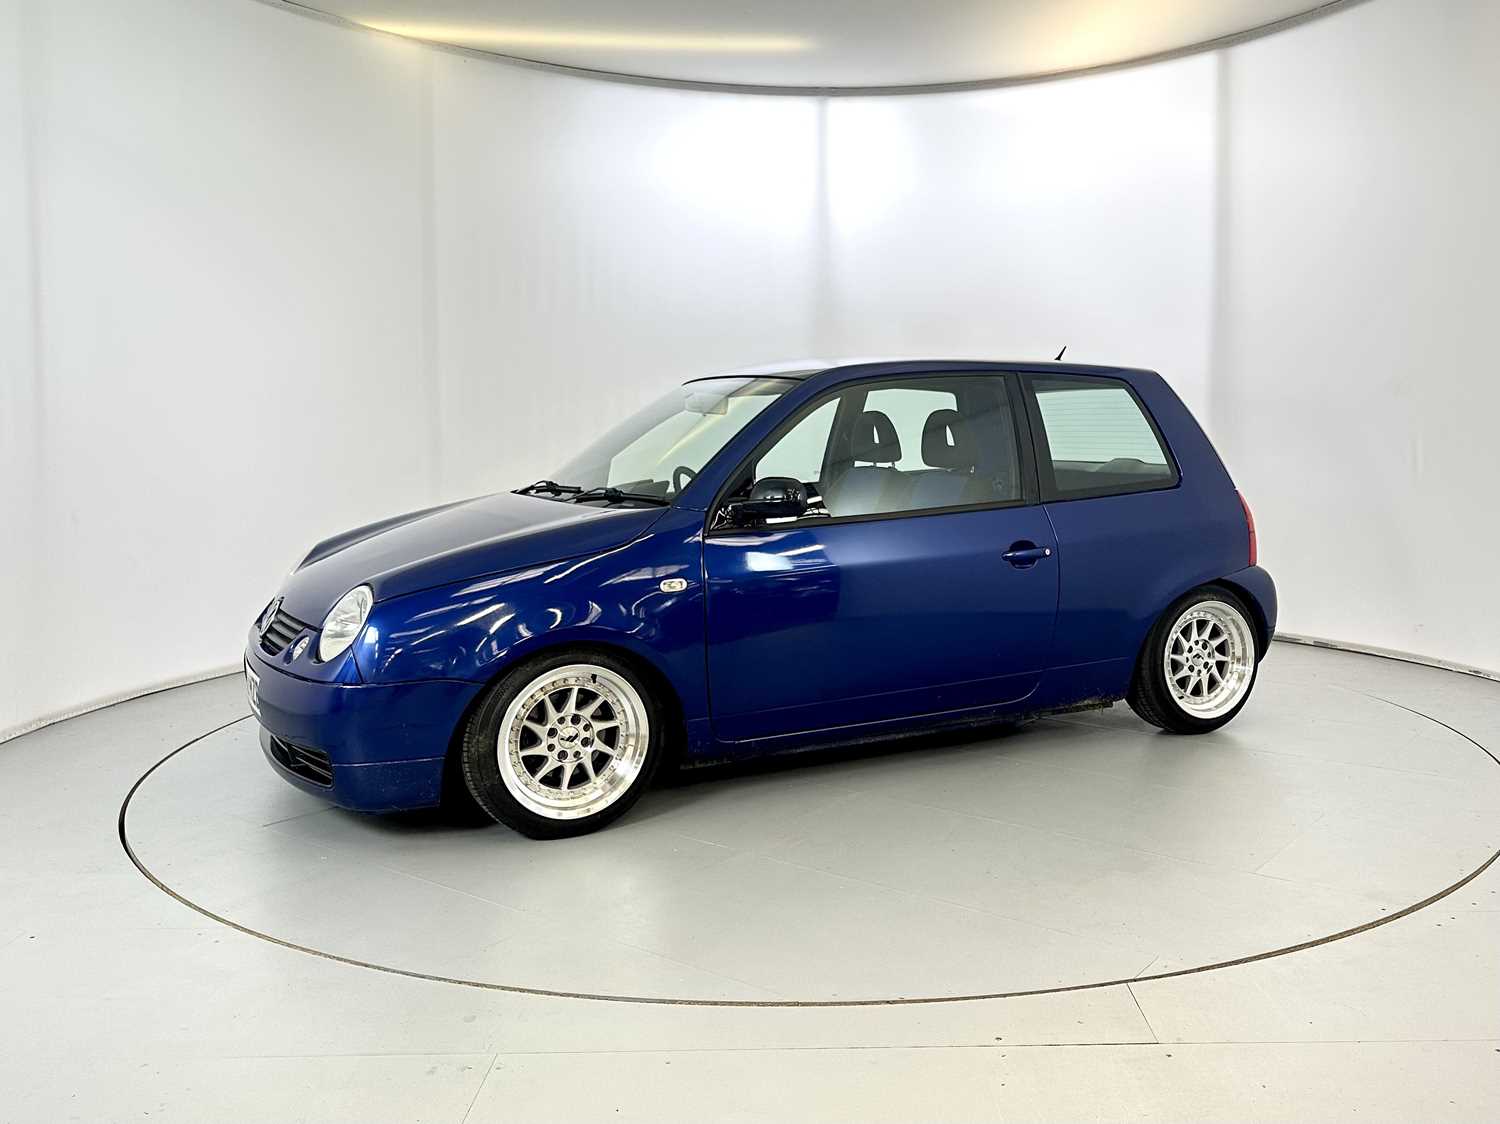 2002 Volkswagen Lupo - Image 4 of 28